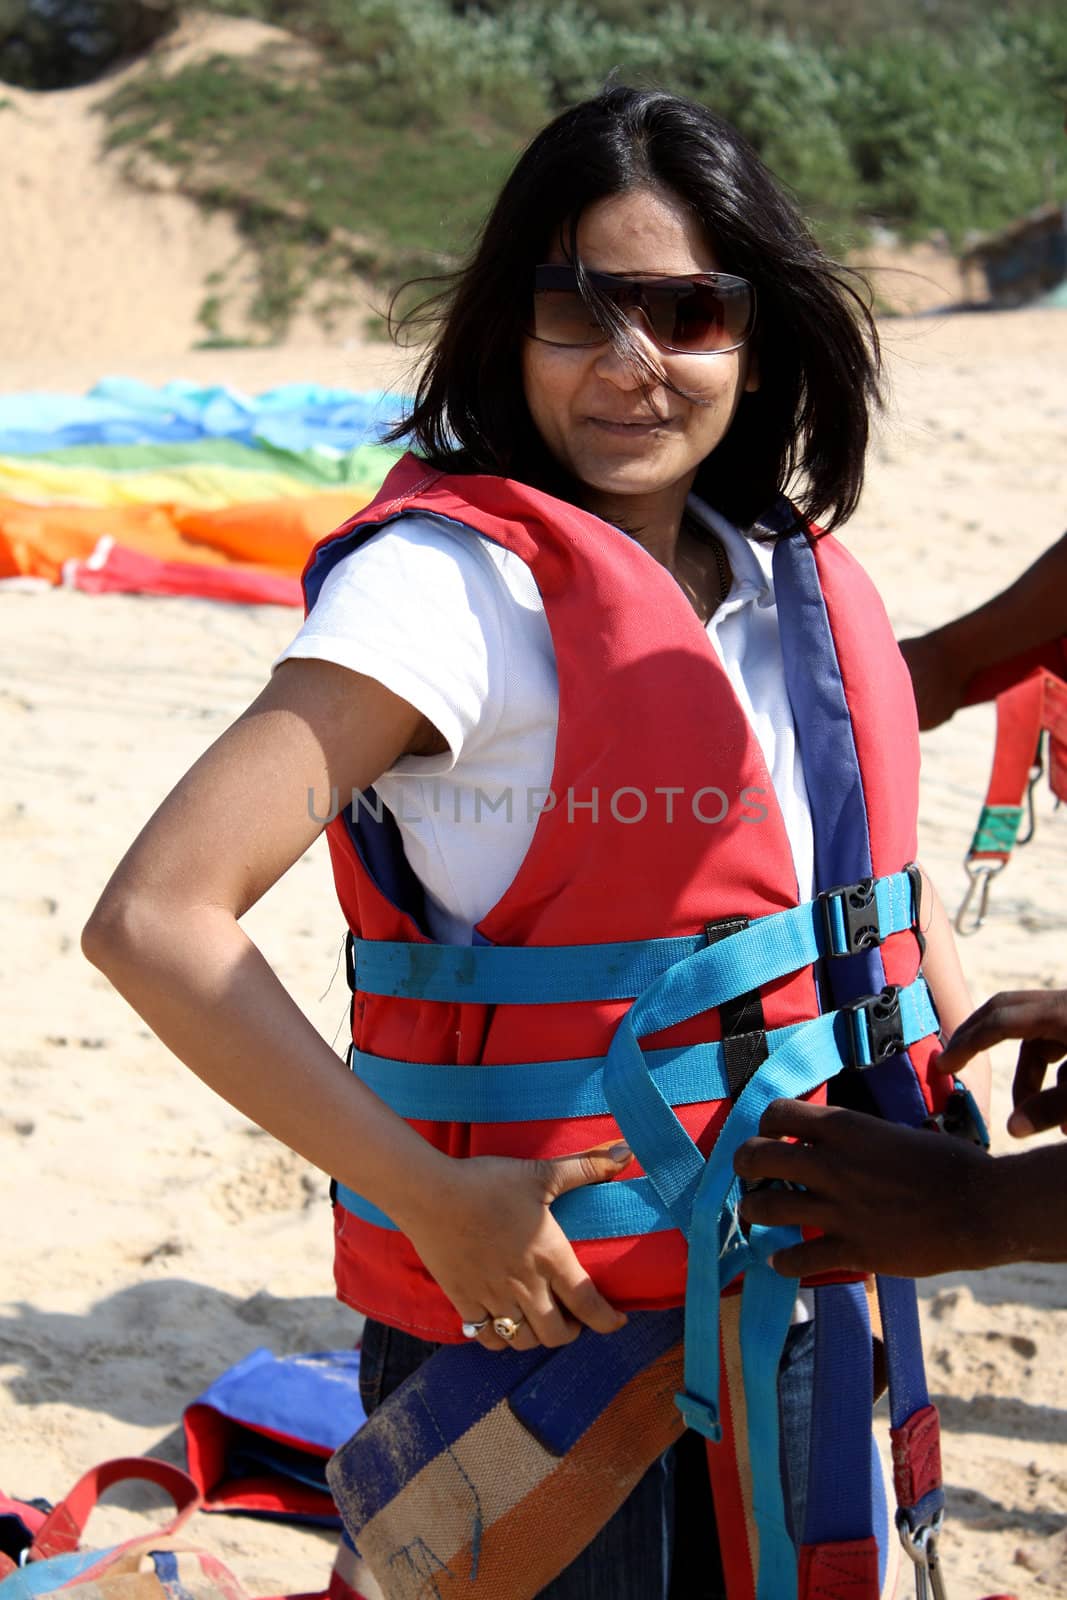 A girl getting ready wearing the safety equipment for parasailing.